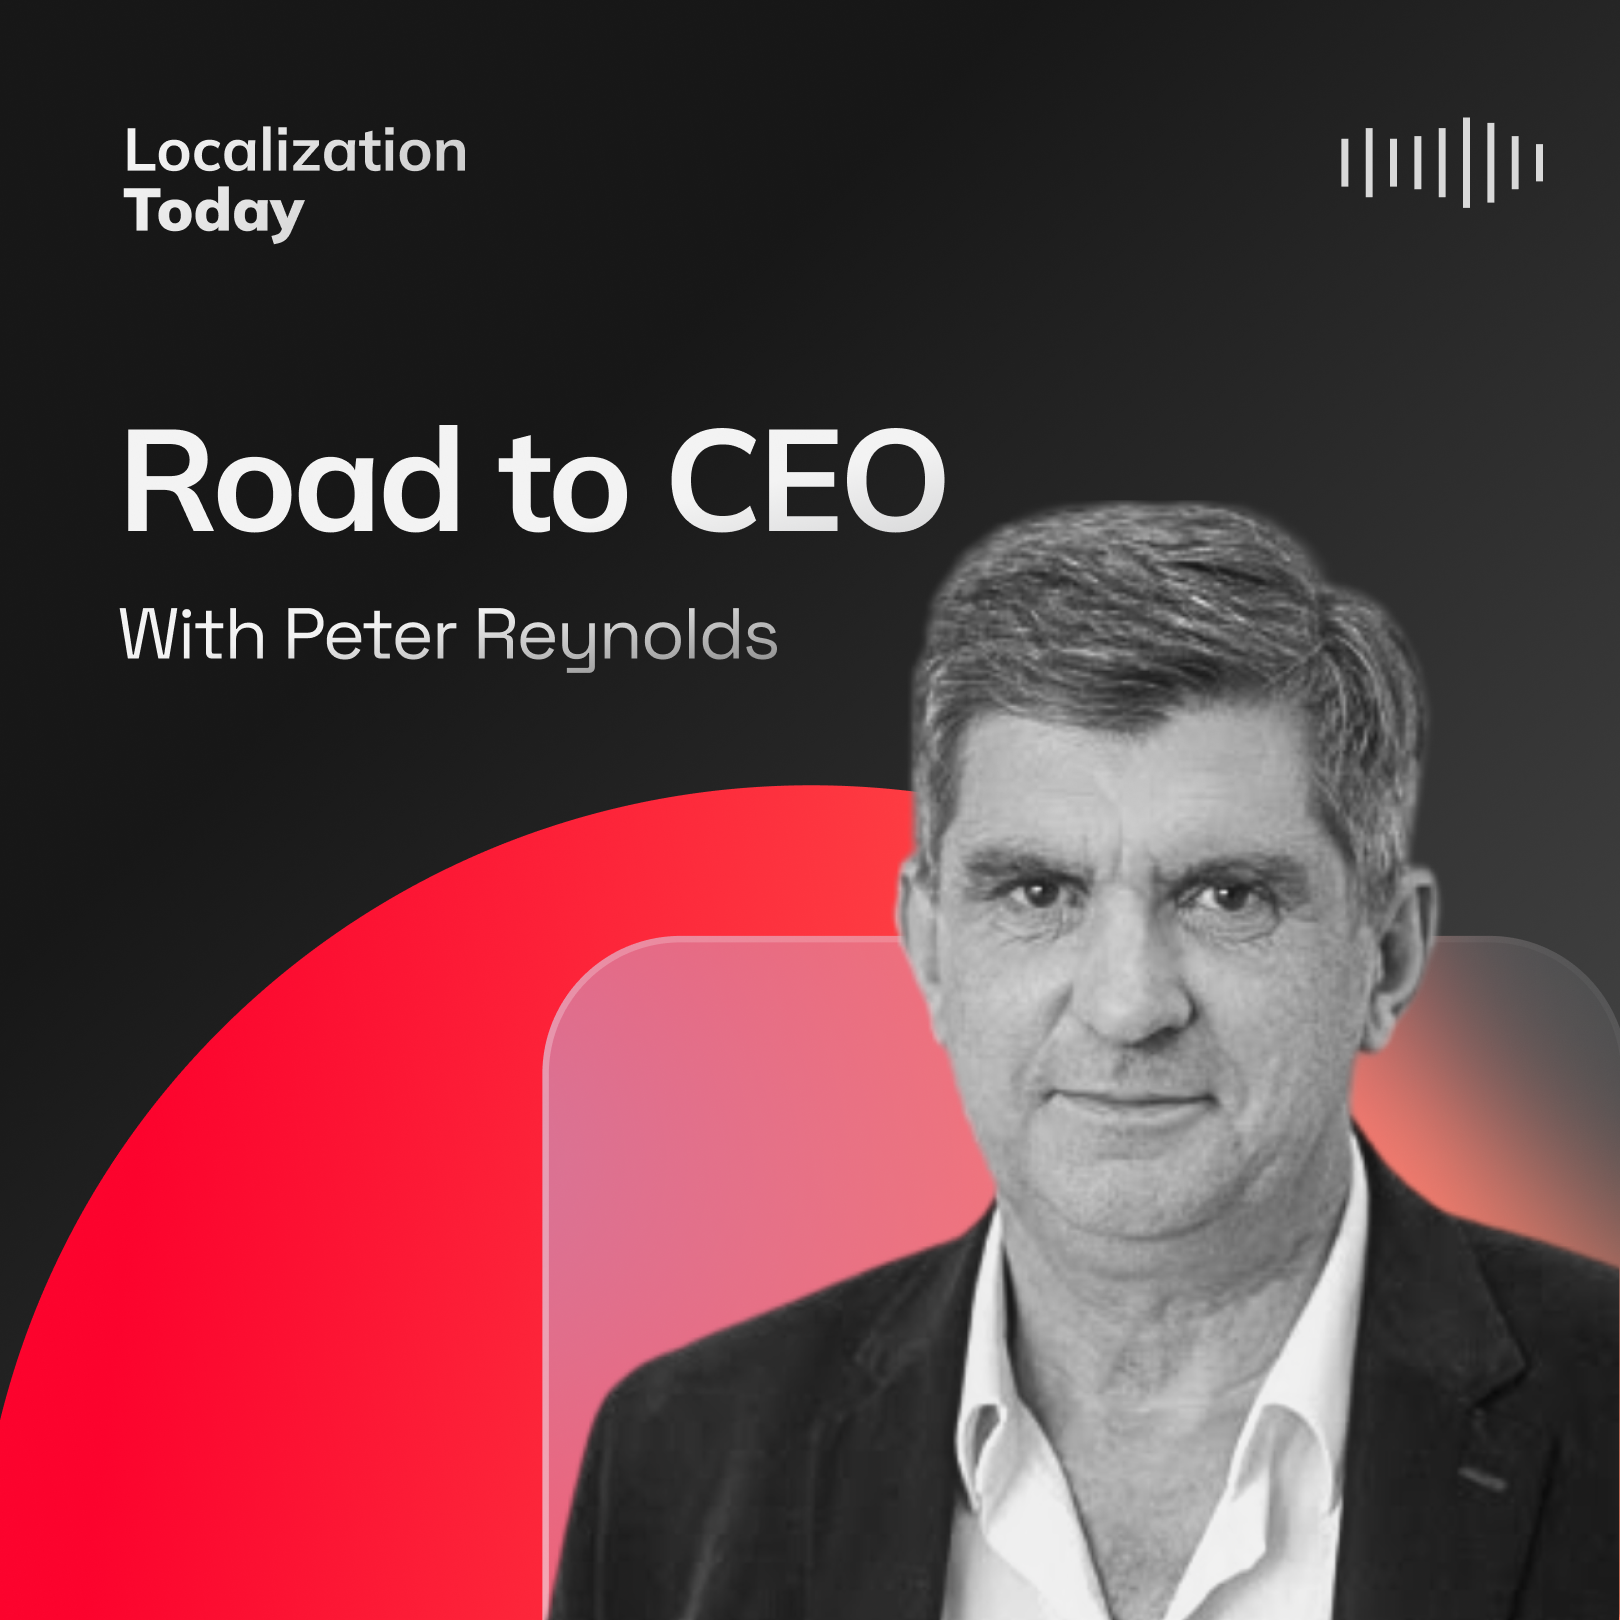 Road to CEO, with Peter Reynolds